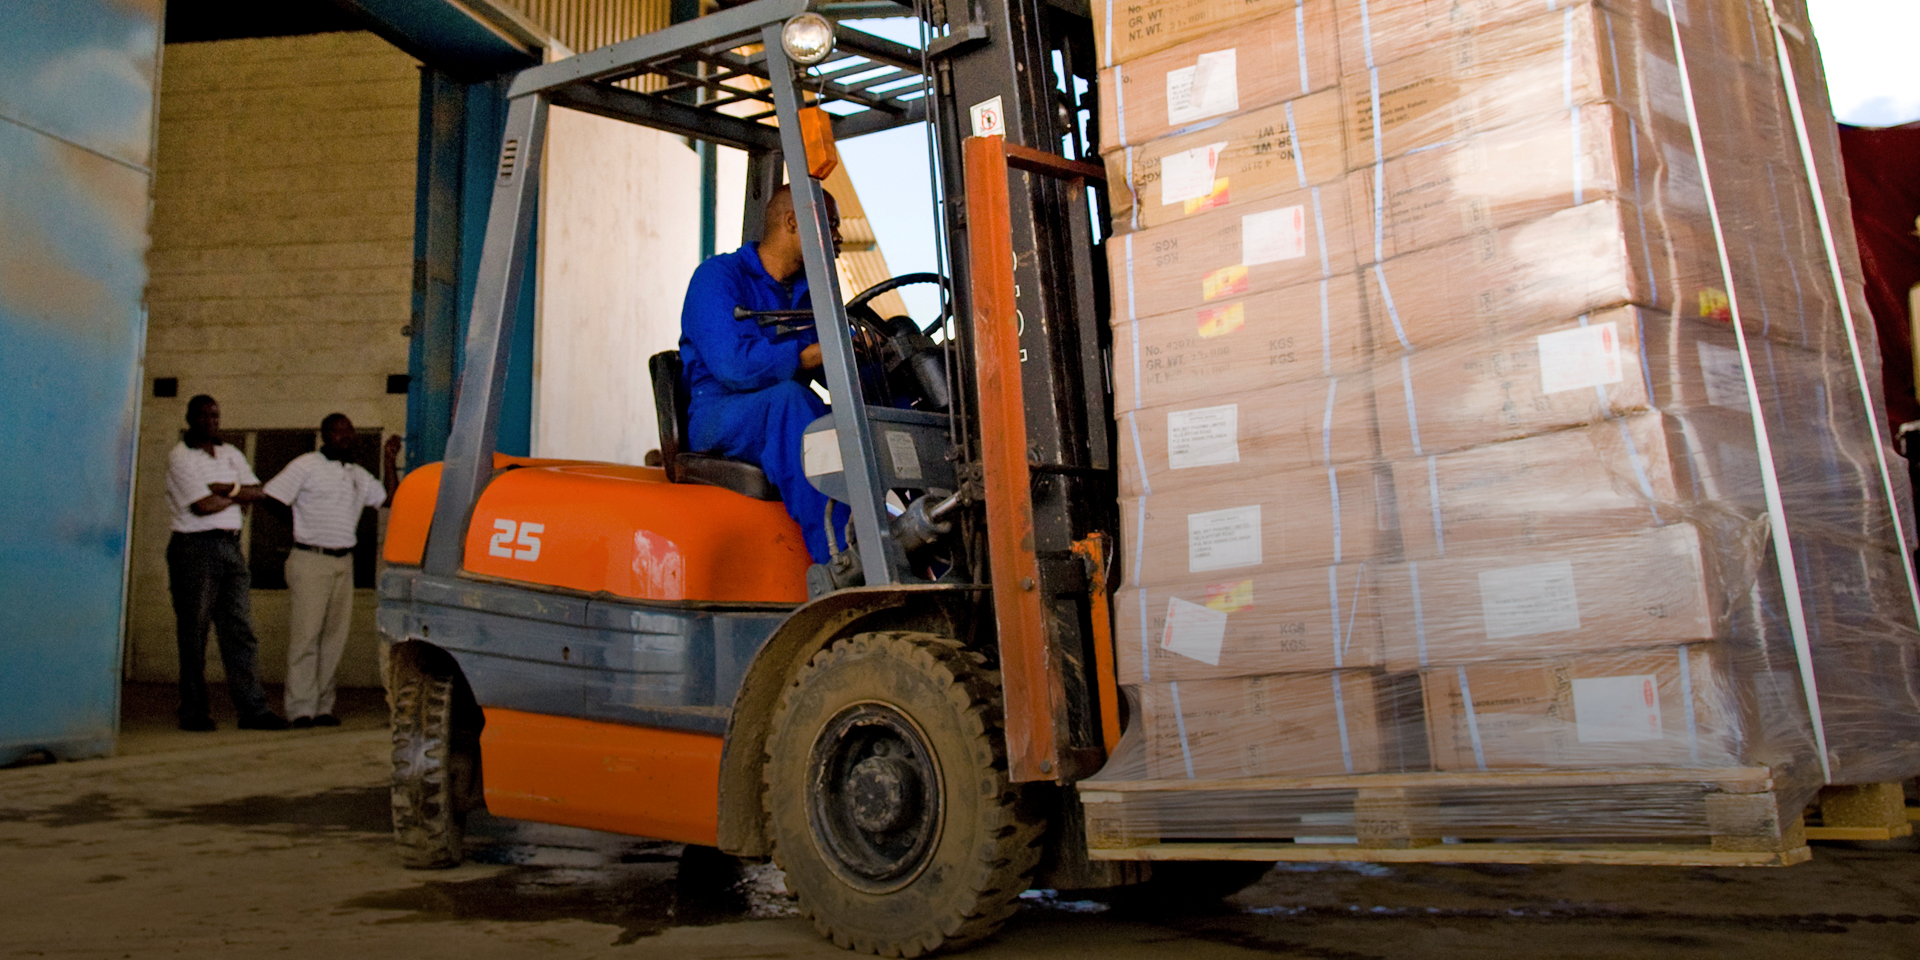 Image of a worker driving a forklift carrying several palleted boxes.